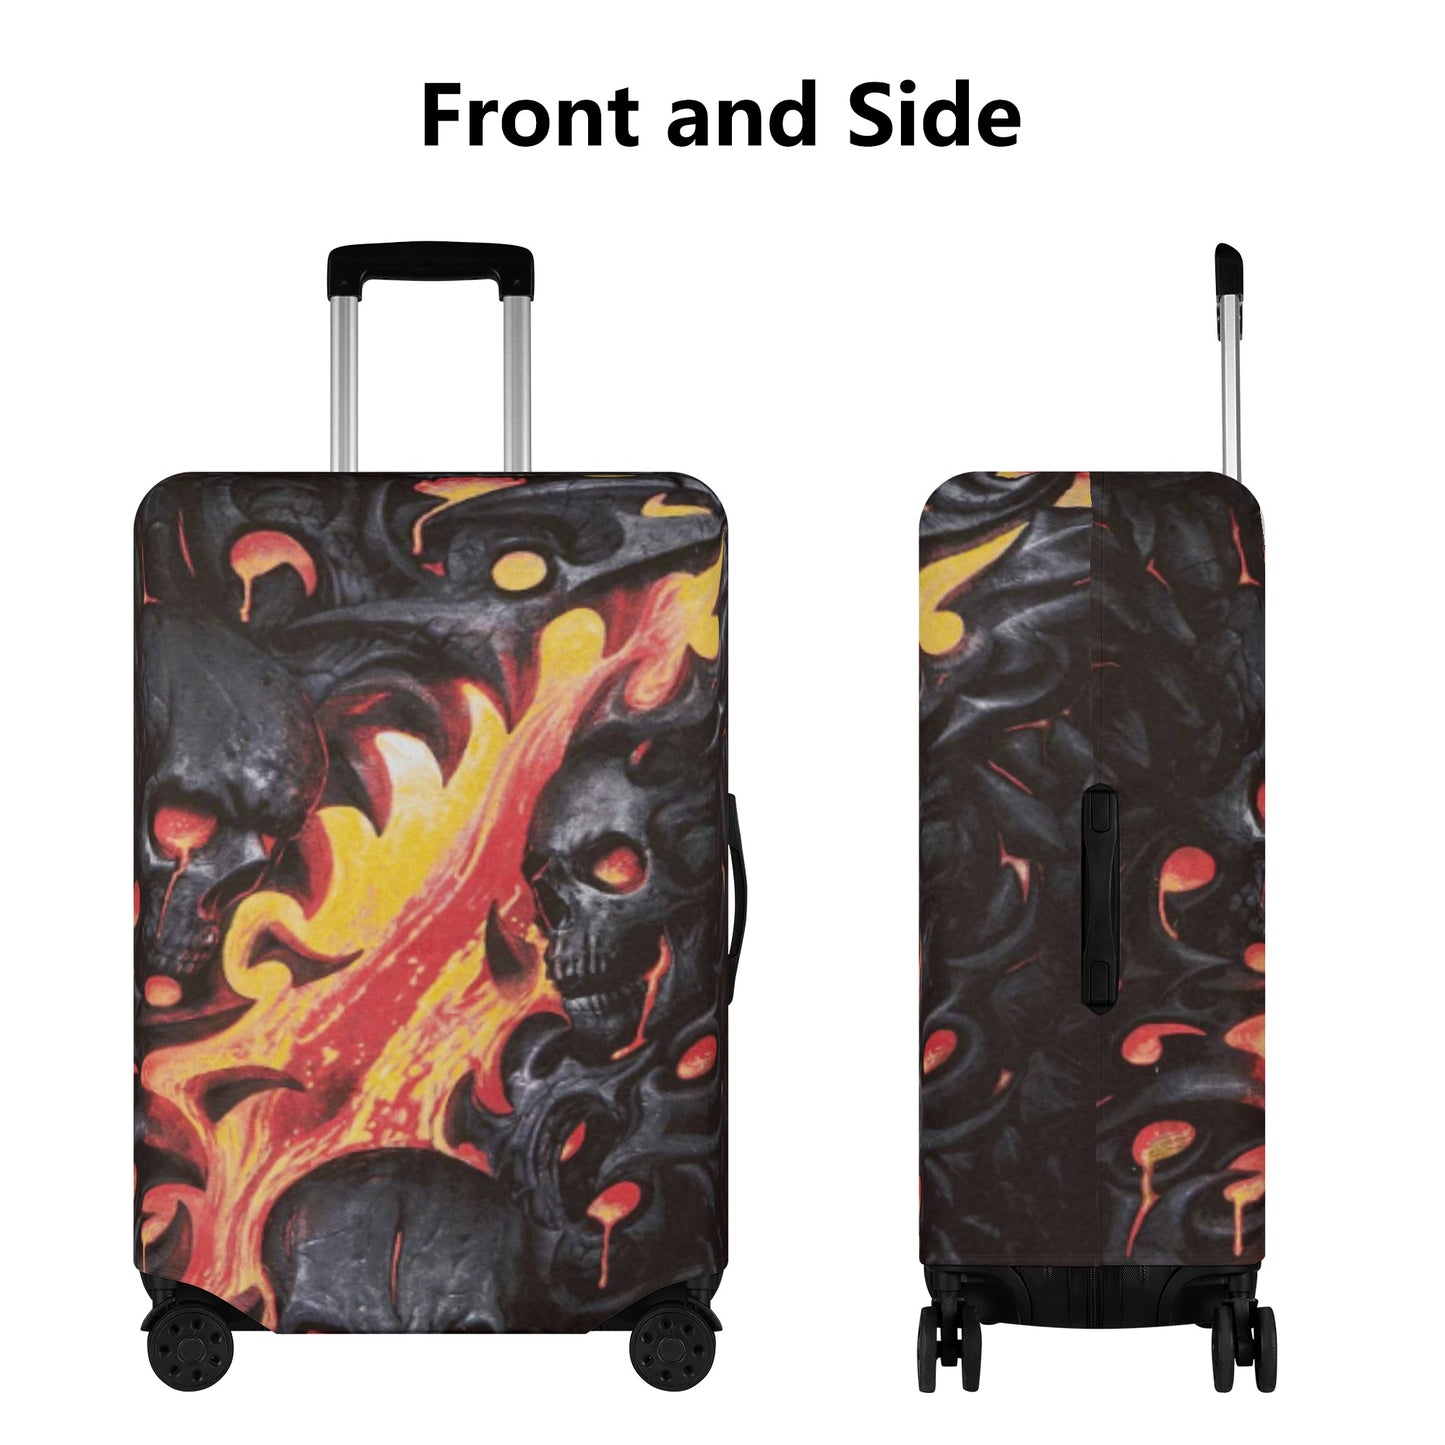 Flaming gothic skull luggage suitcase cover accessories